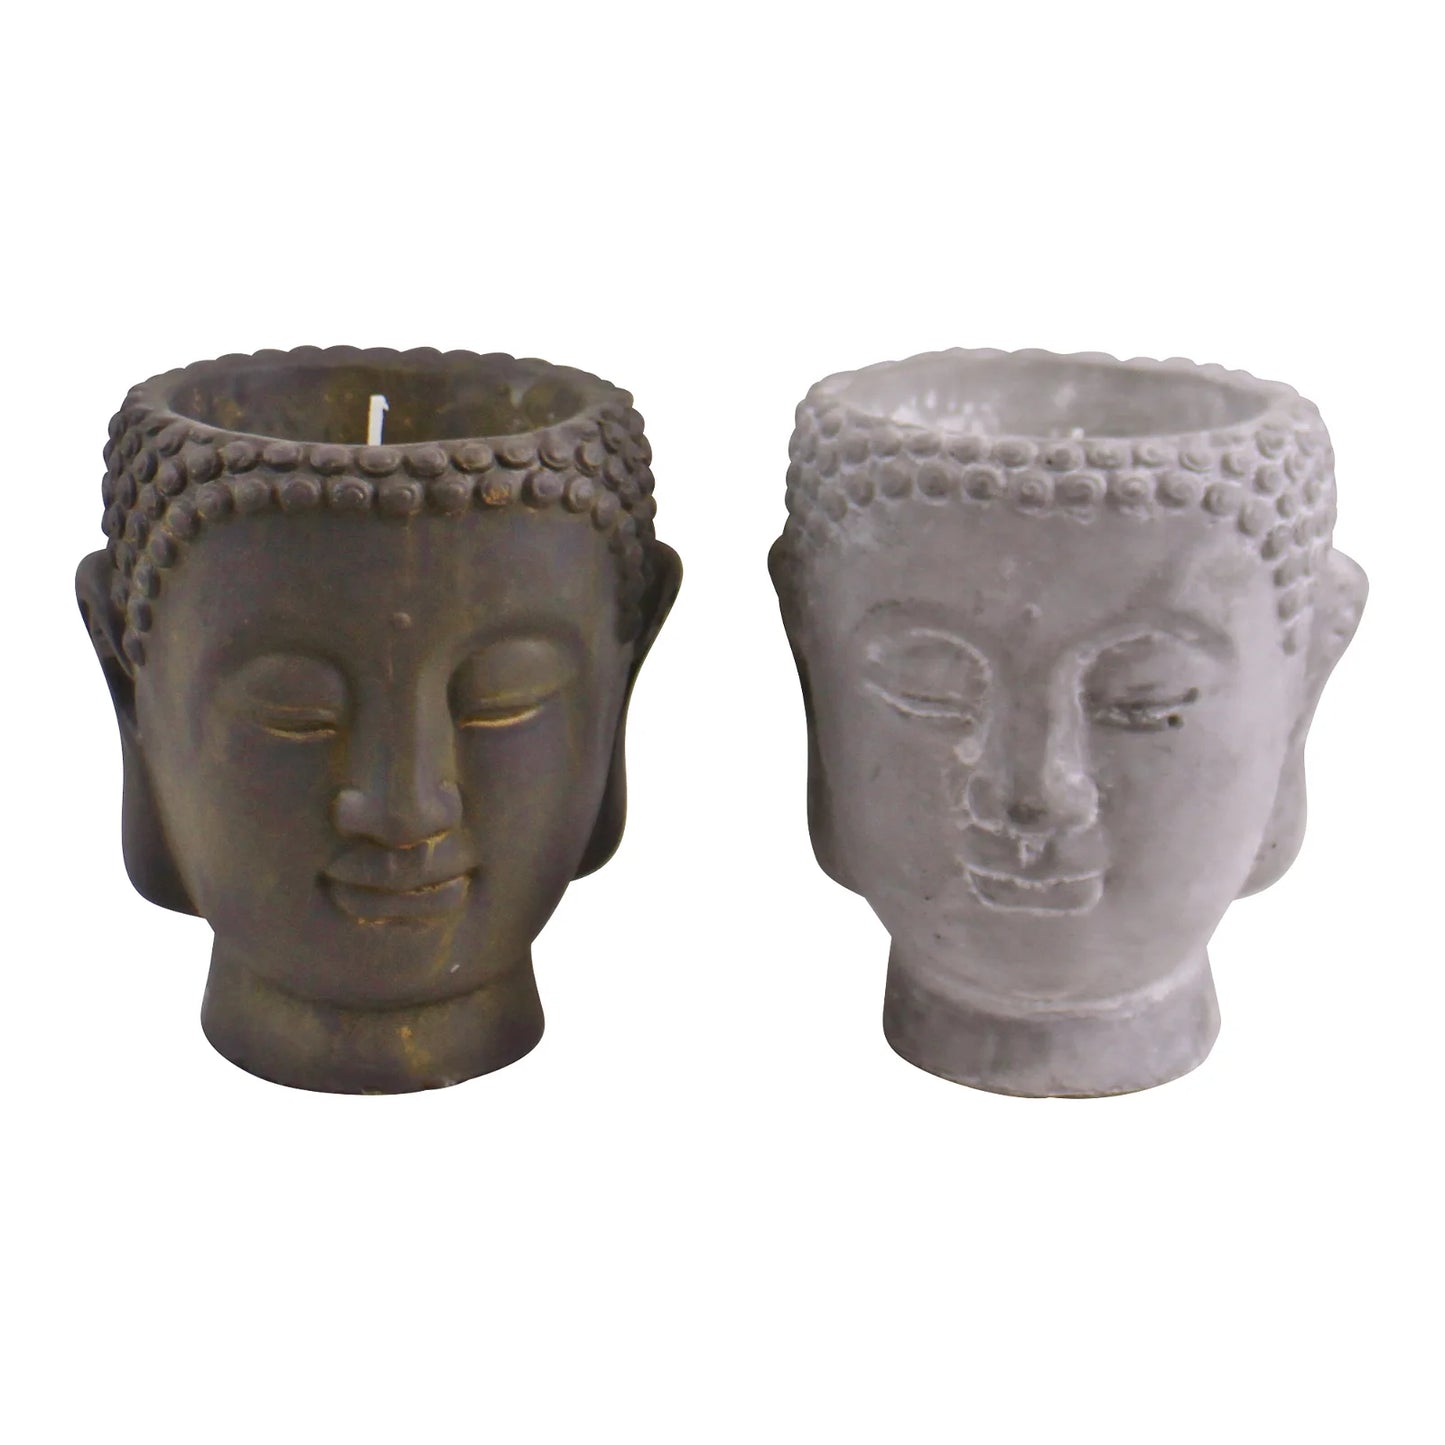 Set of 2 Cement Buddha Design Candles - Available in Medium or Large